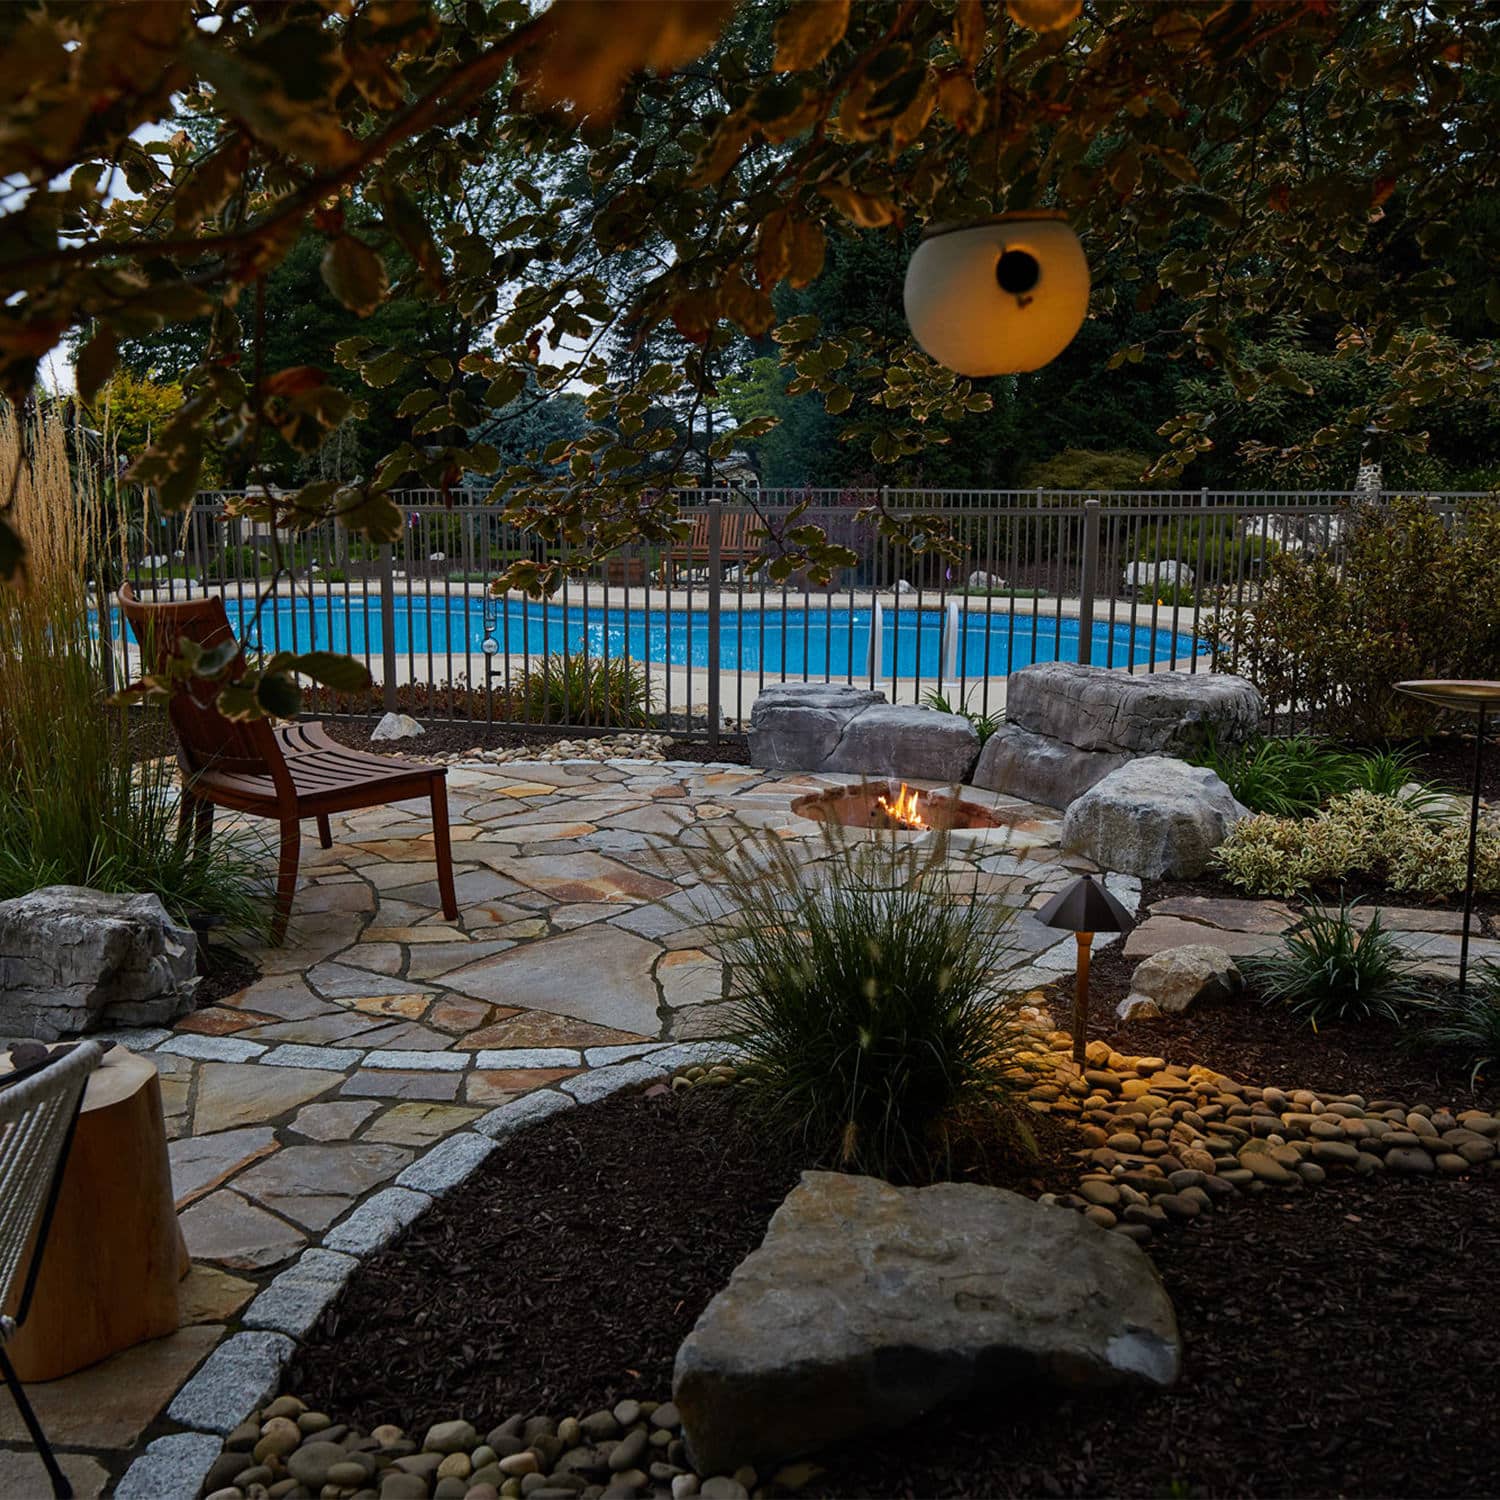 This irregular flagstone patio with sunken fire pit gives this poolside patio a rustic, inviting and cozy feeling…don’t you think?